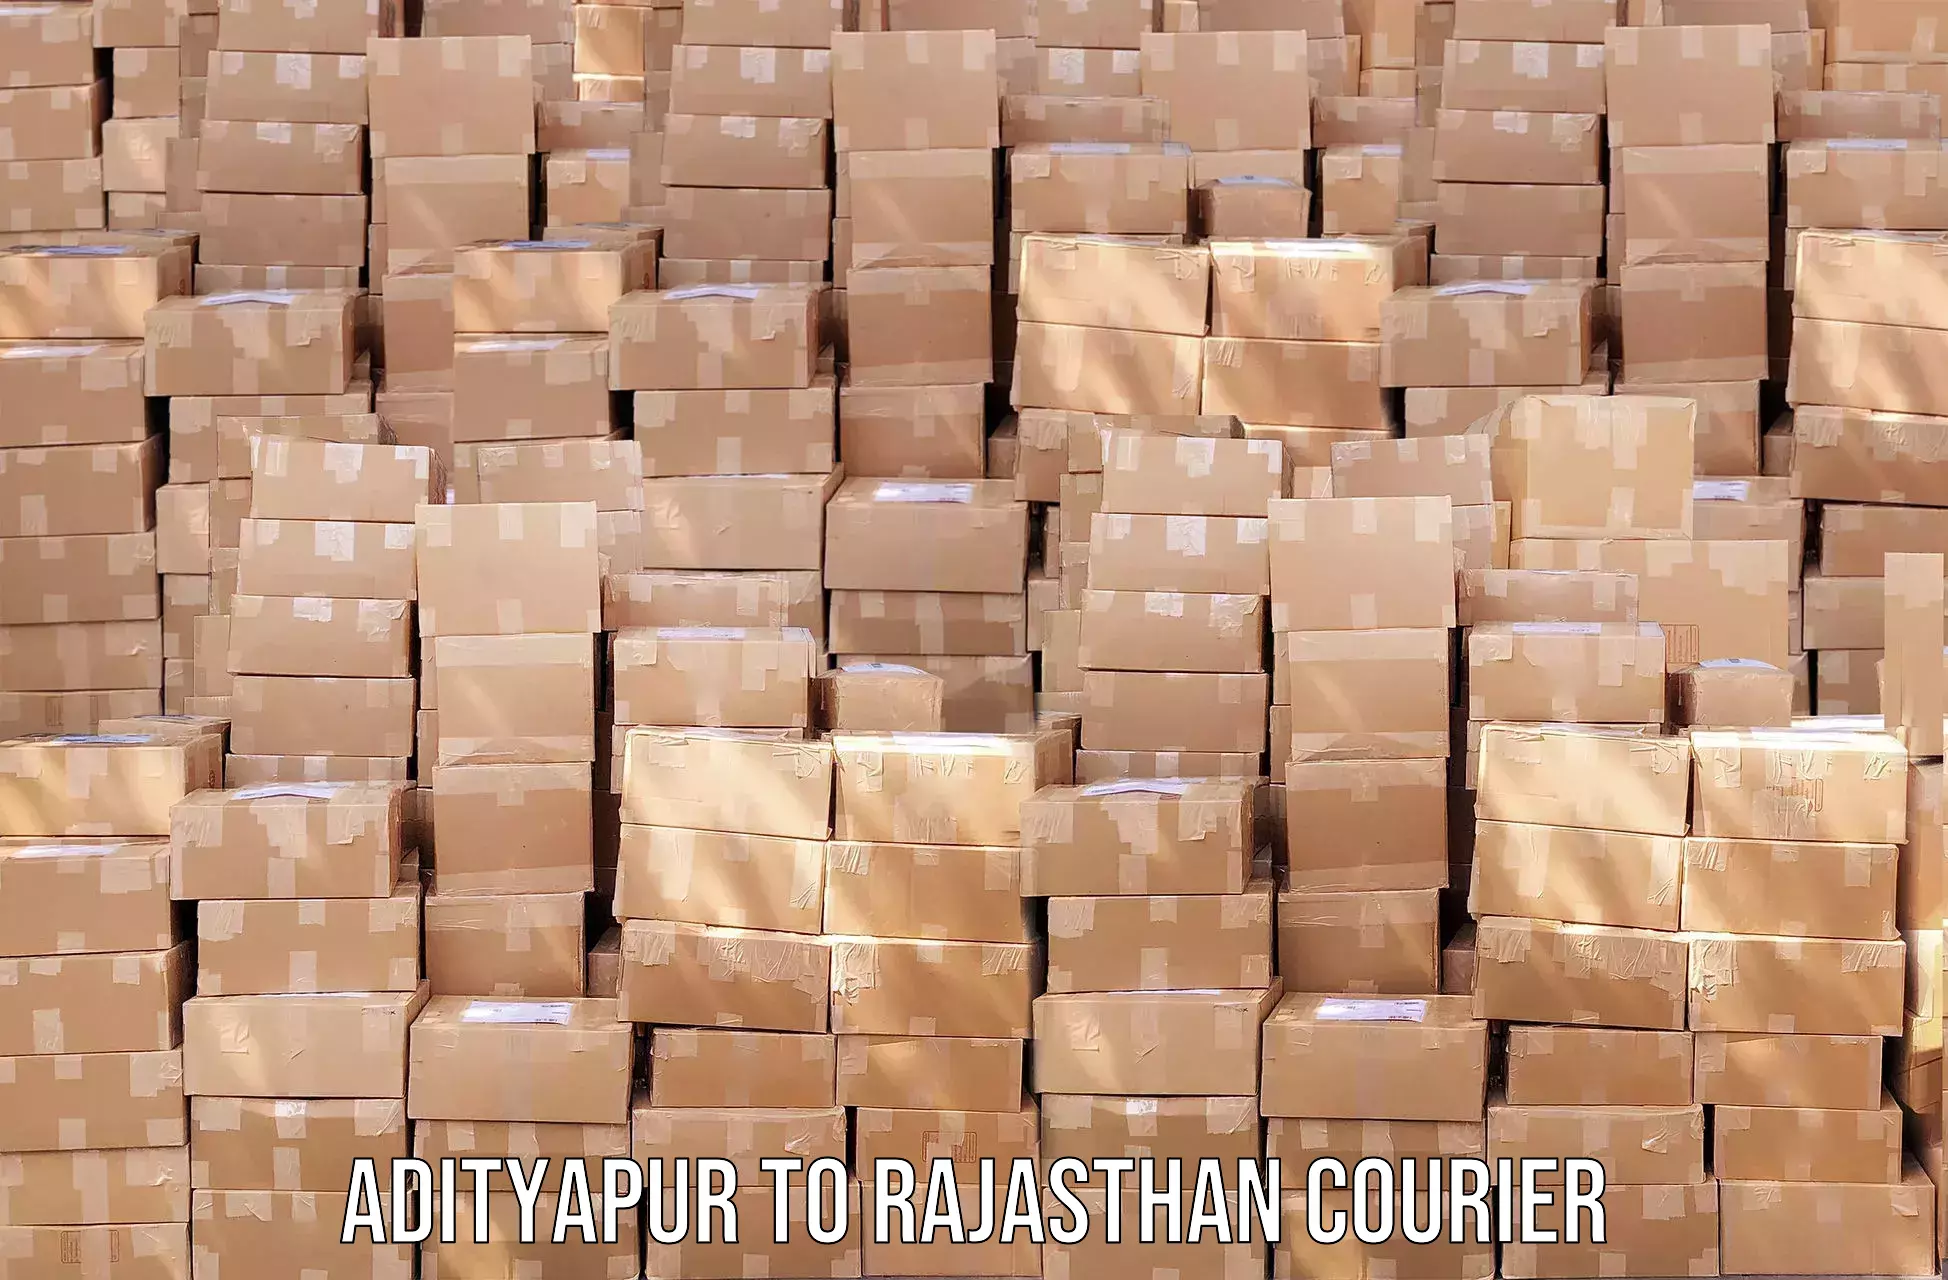 Global courier networks Adityapur to Bharatpur